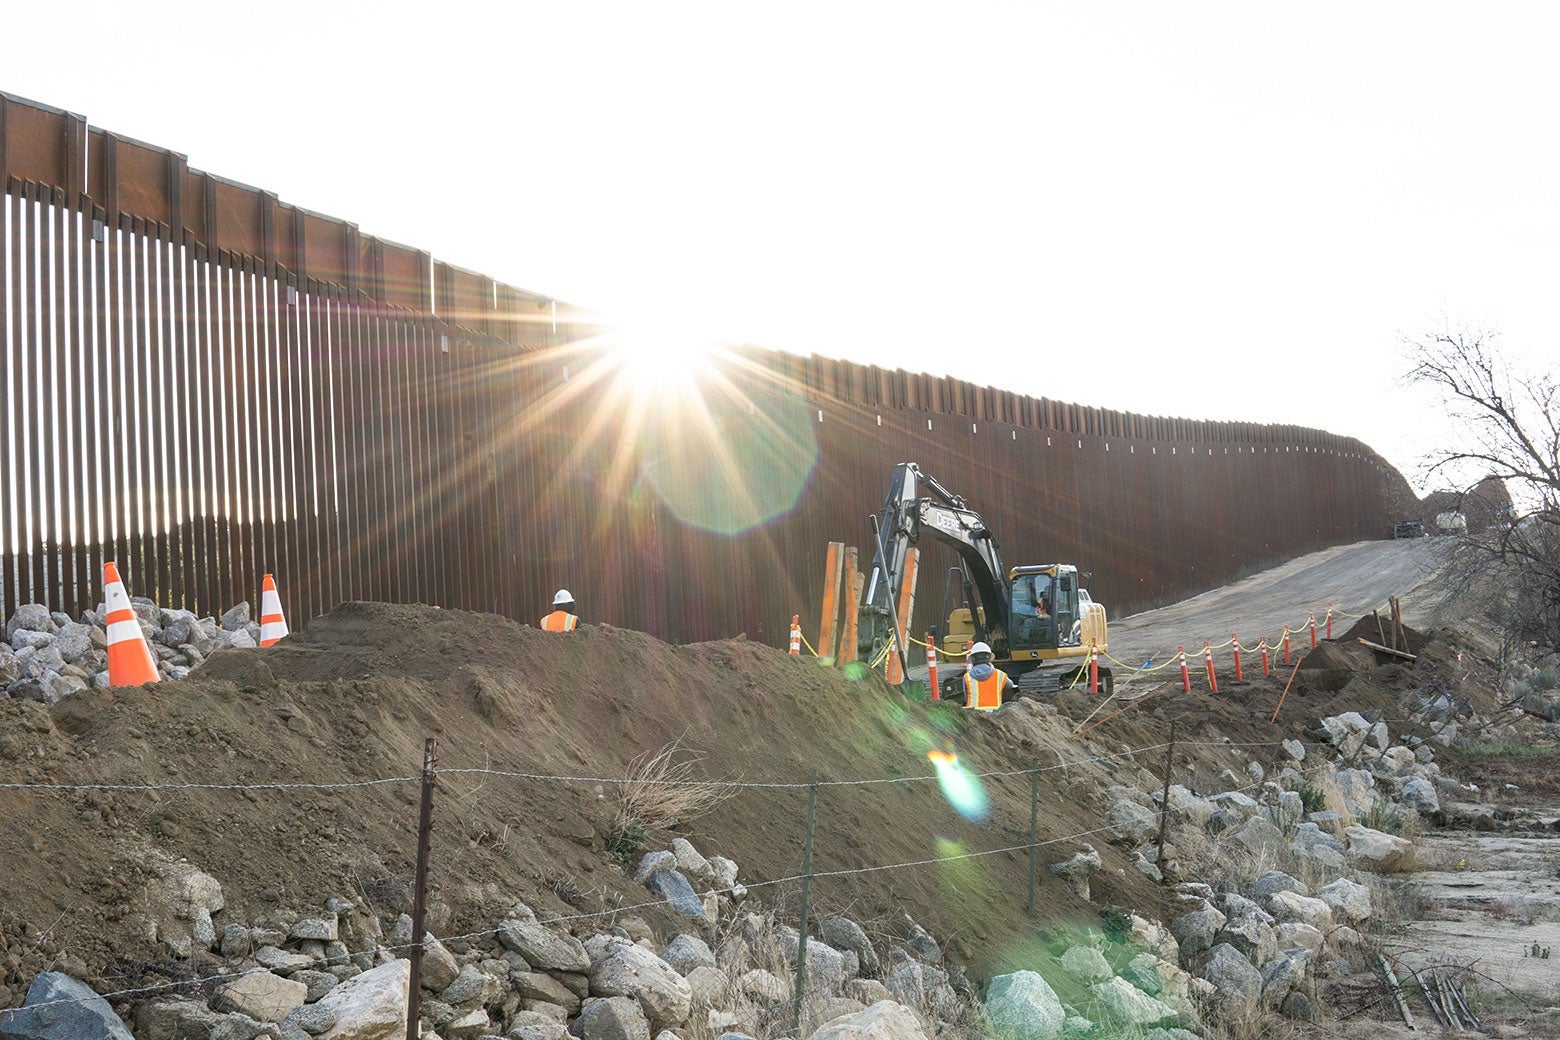 Late sun flares through the top of the United States border wall as a crew works around an excavator, in a strip of dirt, rubble, and barbed wire. 